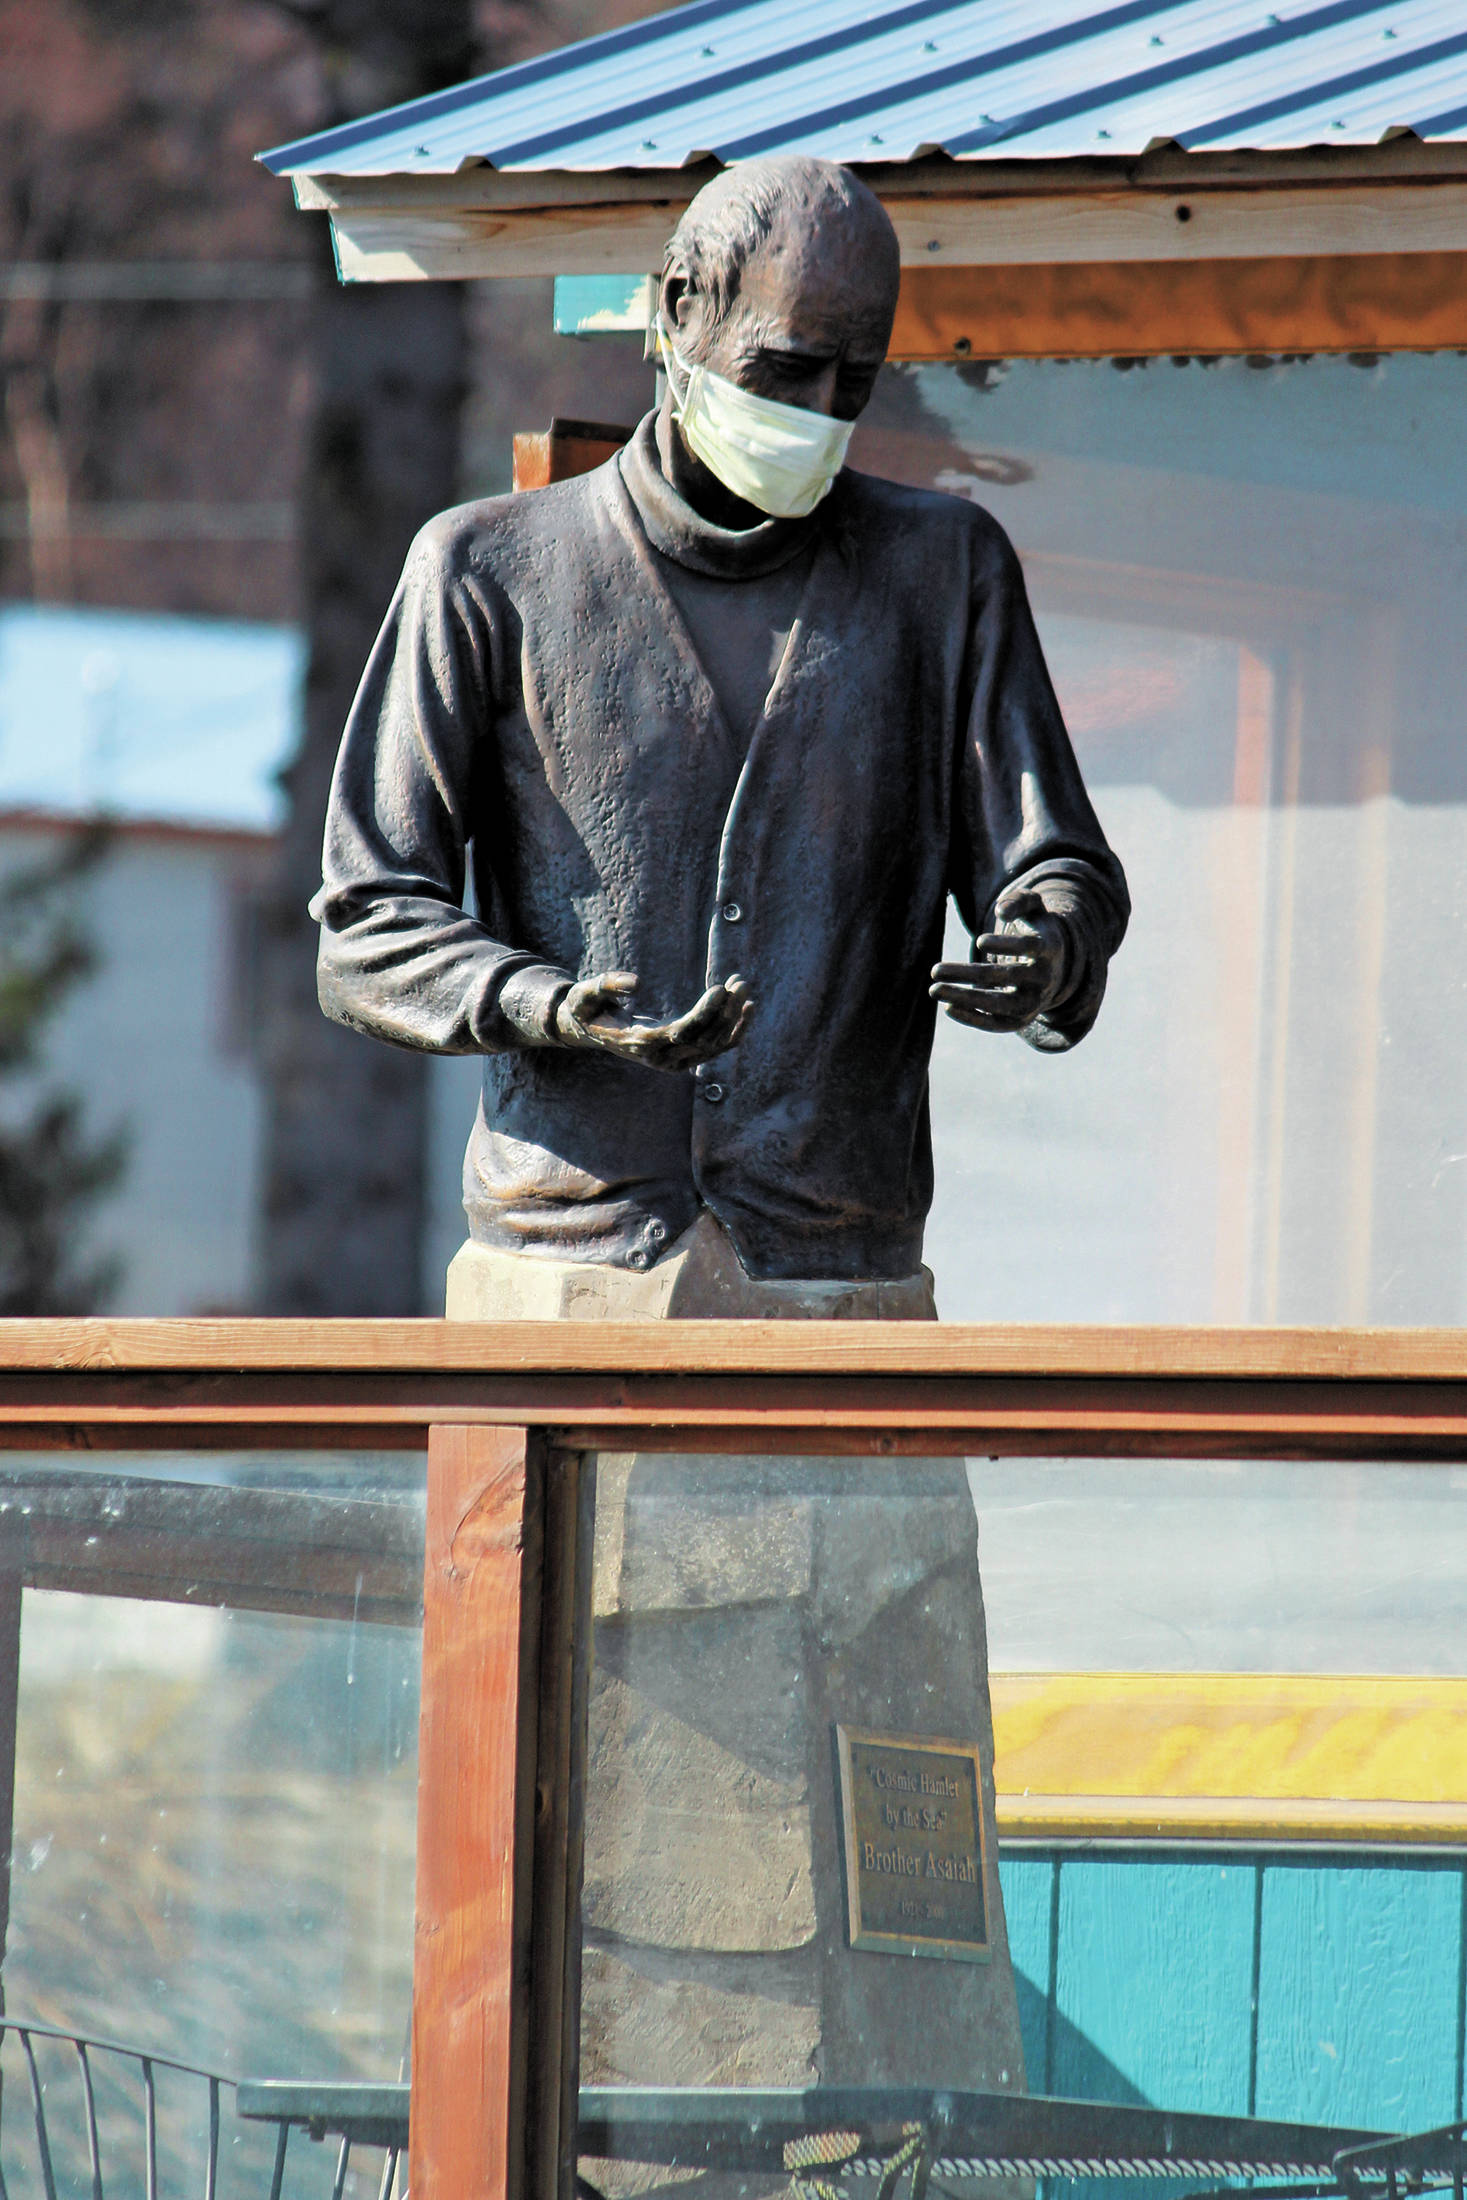 The statue of Brother Asaiah Bates that stands at Cosmic Kitchen is seen wearing a mask on Monday, April 6, 2020 in Homer, Alaska. The state of Alaska is currently advising people to wear protective cloth coverings when they have to go out in public for essentials. (Photo by Megan Pacer/Homer News)